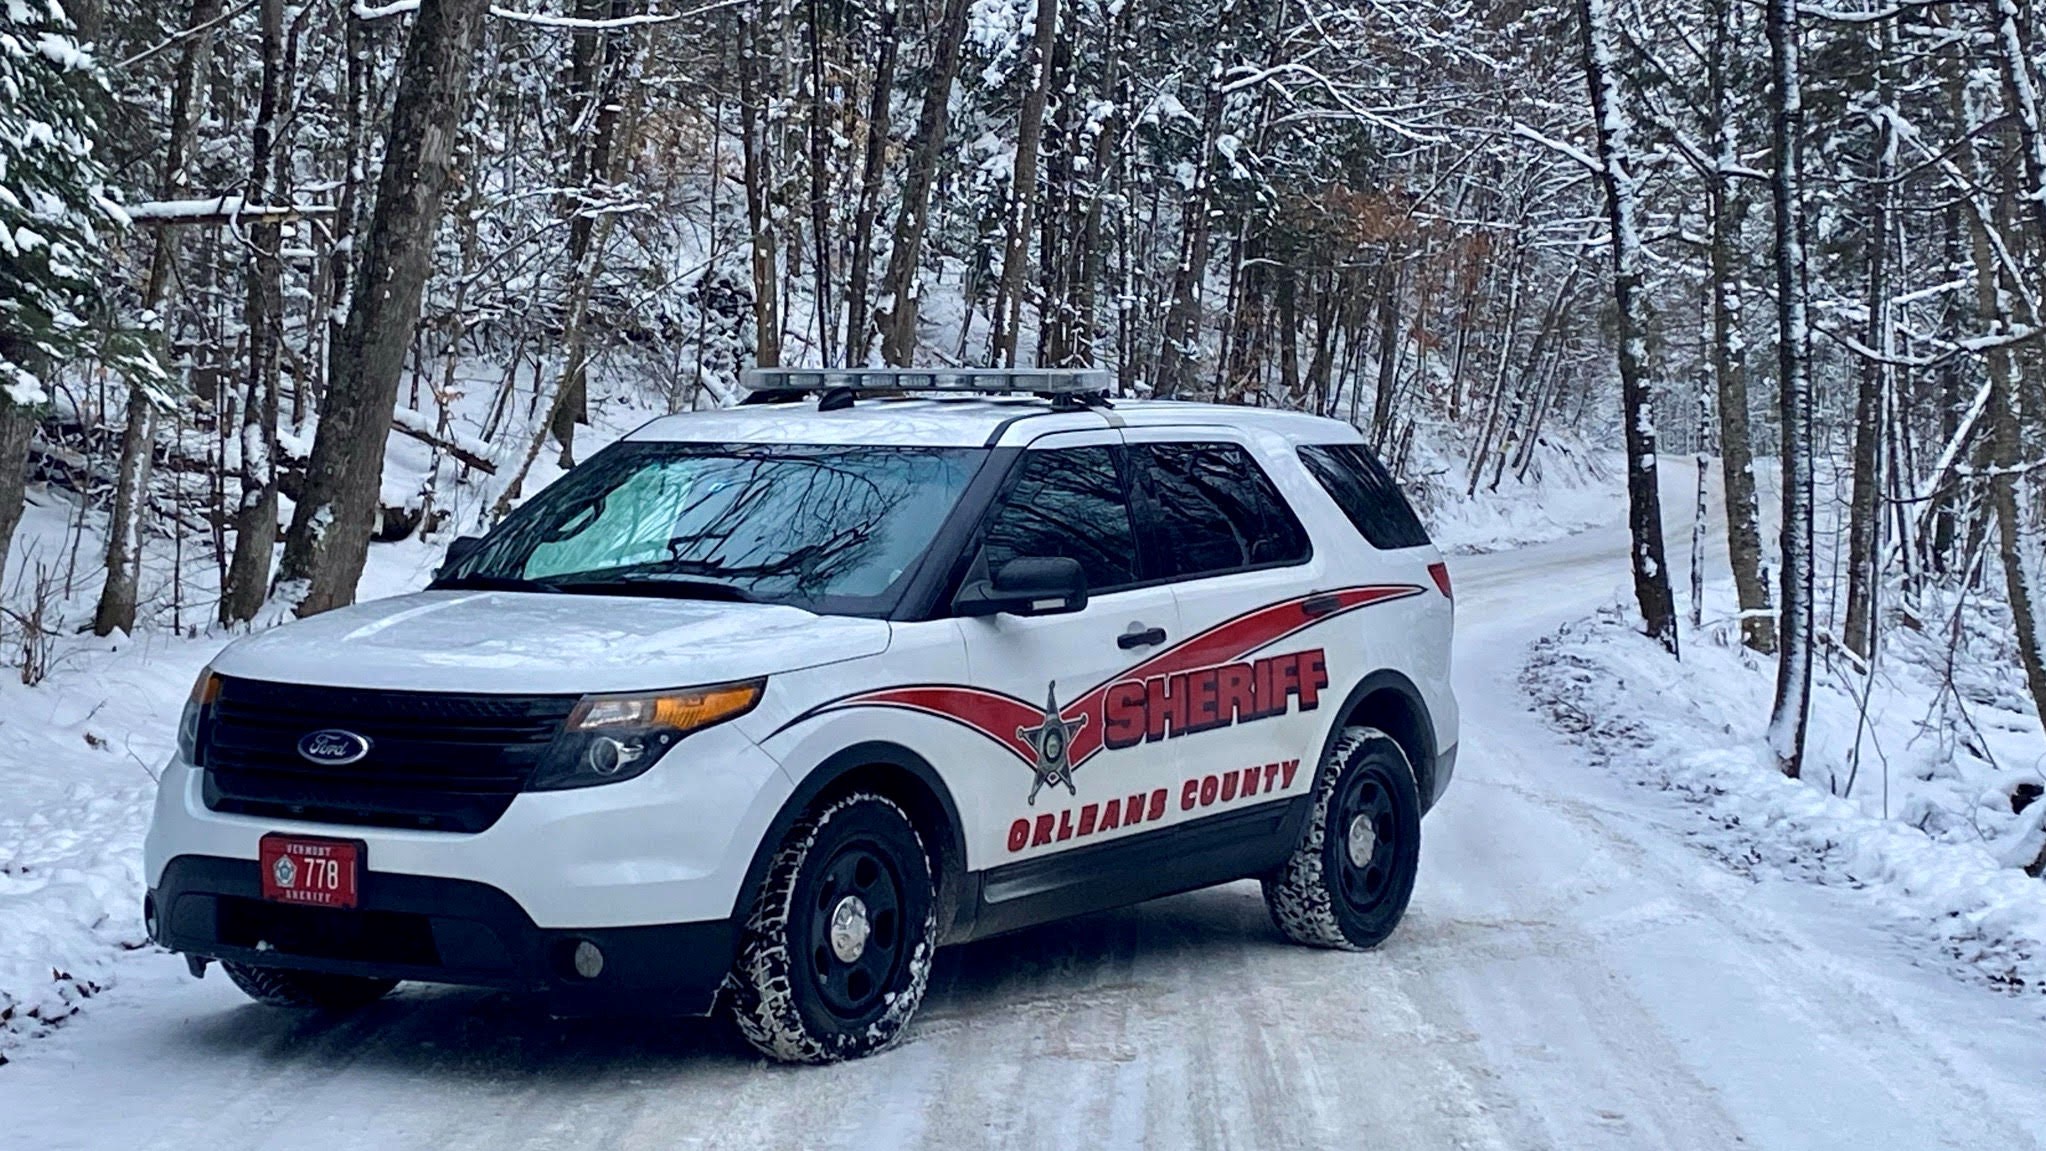 Winter picture of a cruiser on a snowy road